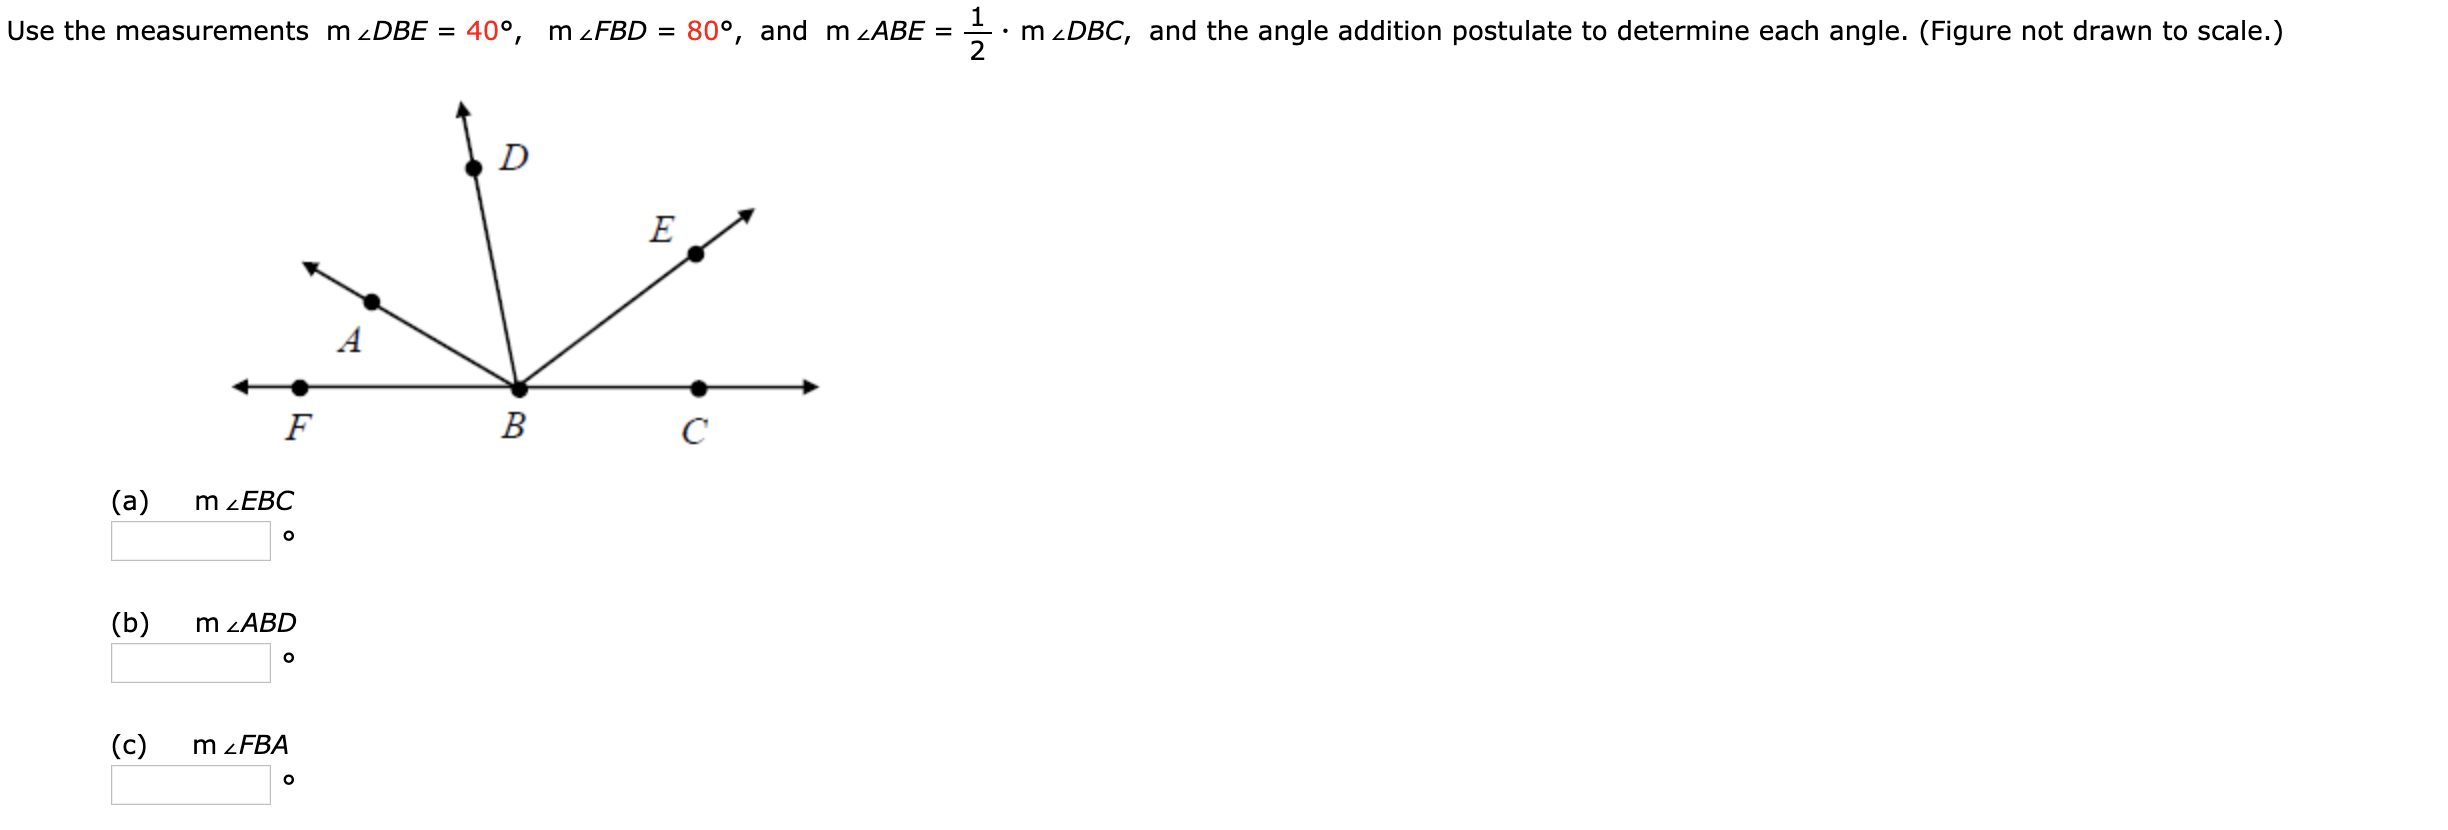 Use the measurements m 2DBE = 40°, m zFBD = 80°, and m zABE
m zDBC, and the angle addition postulate to determine each angle. (Figure not drawn to scale.)
D
B
(a)
m ZEBC
(b)
m zABD
(c)
m zFBA
